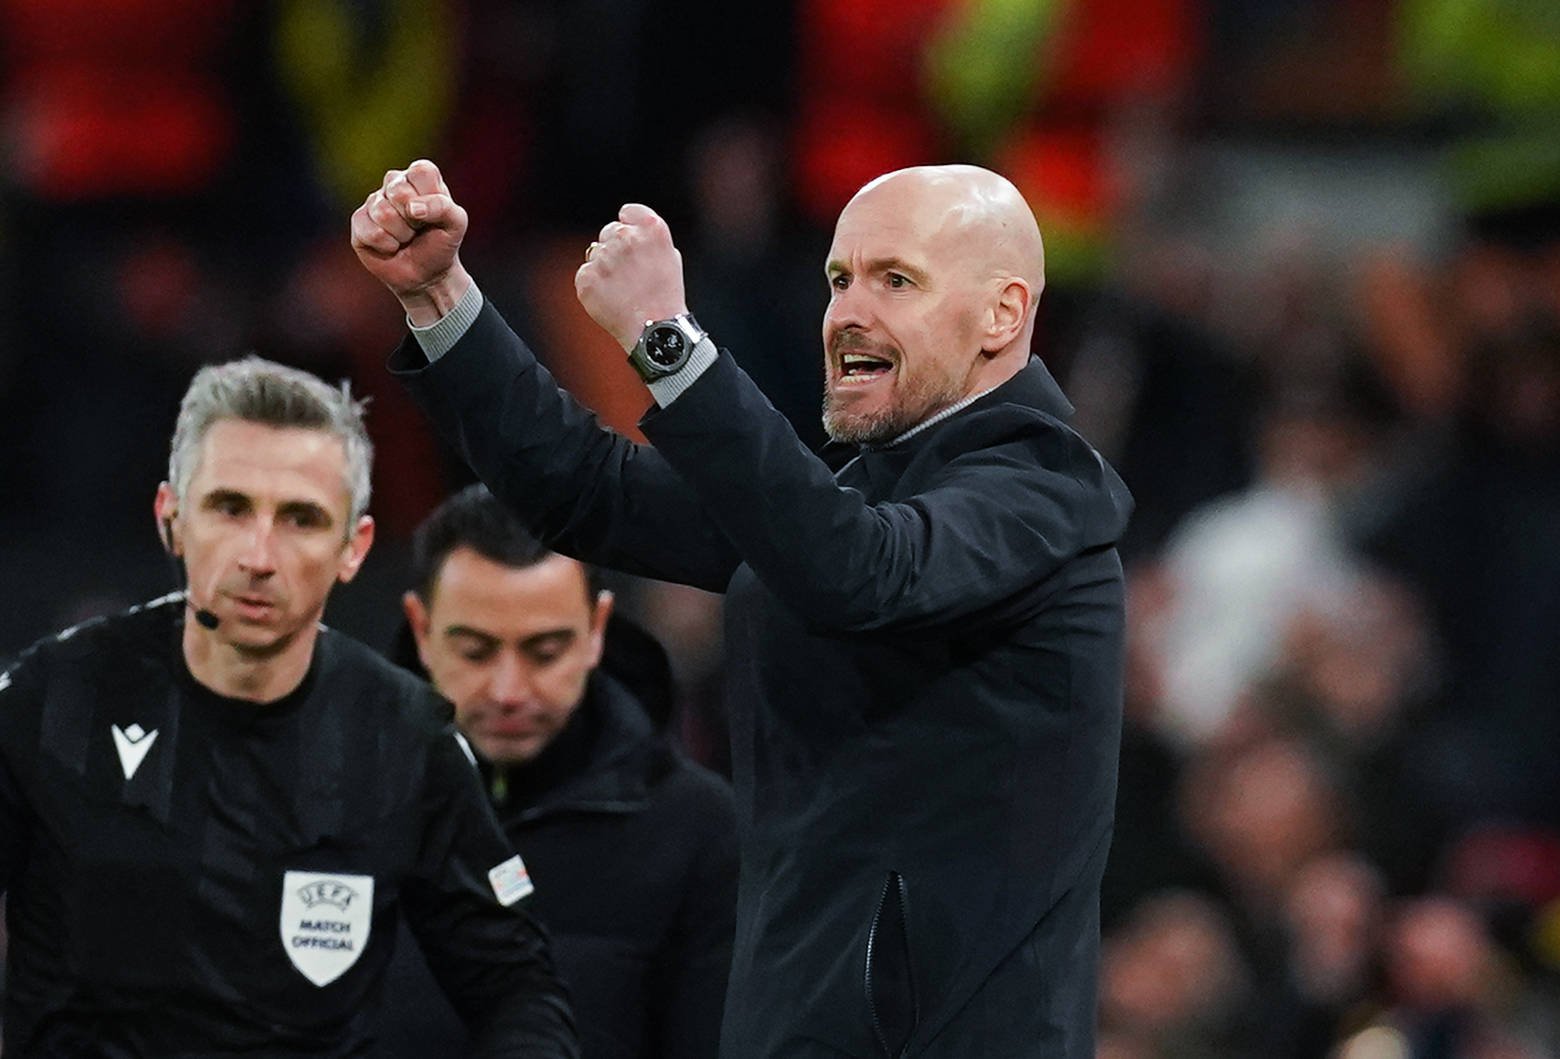 A New Erik ten Hag pattern is becoming clear at Manchester United